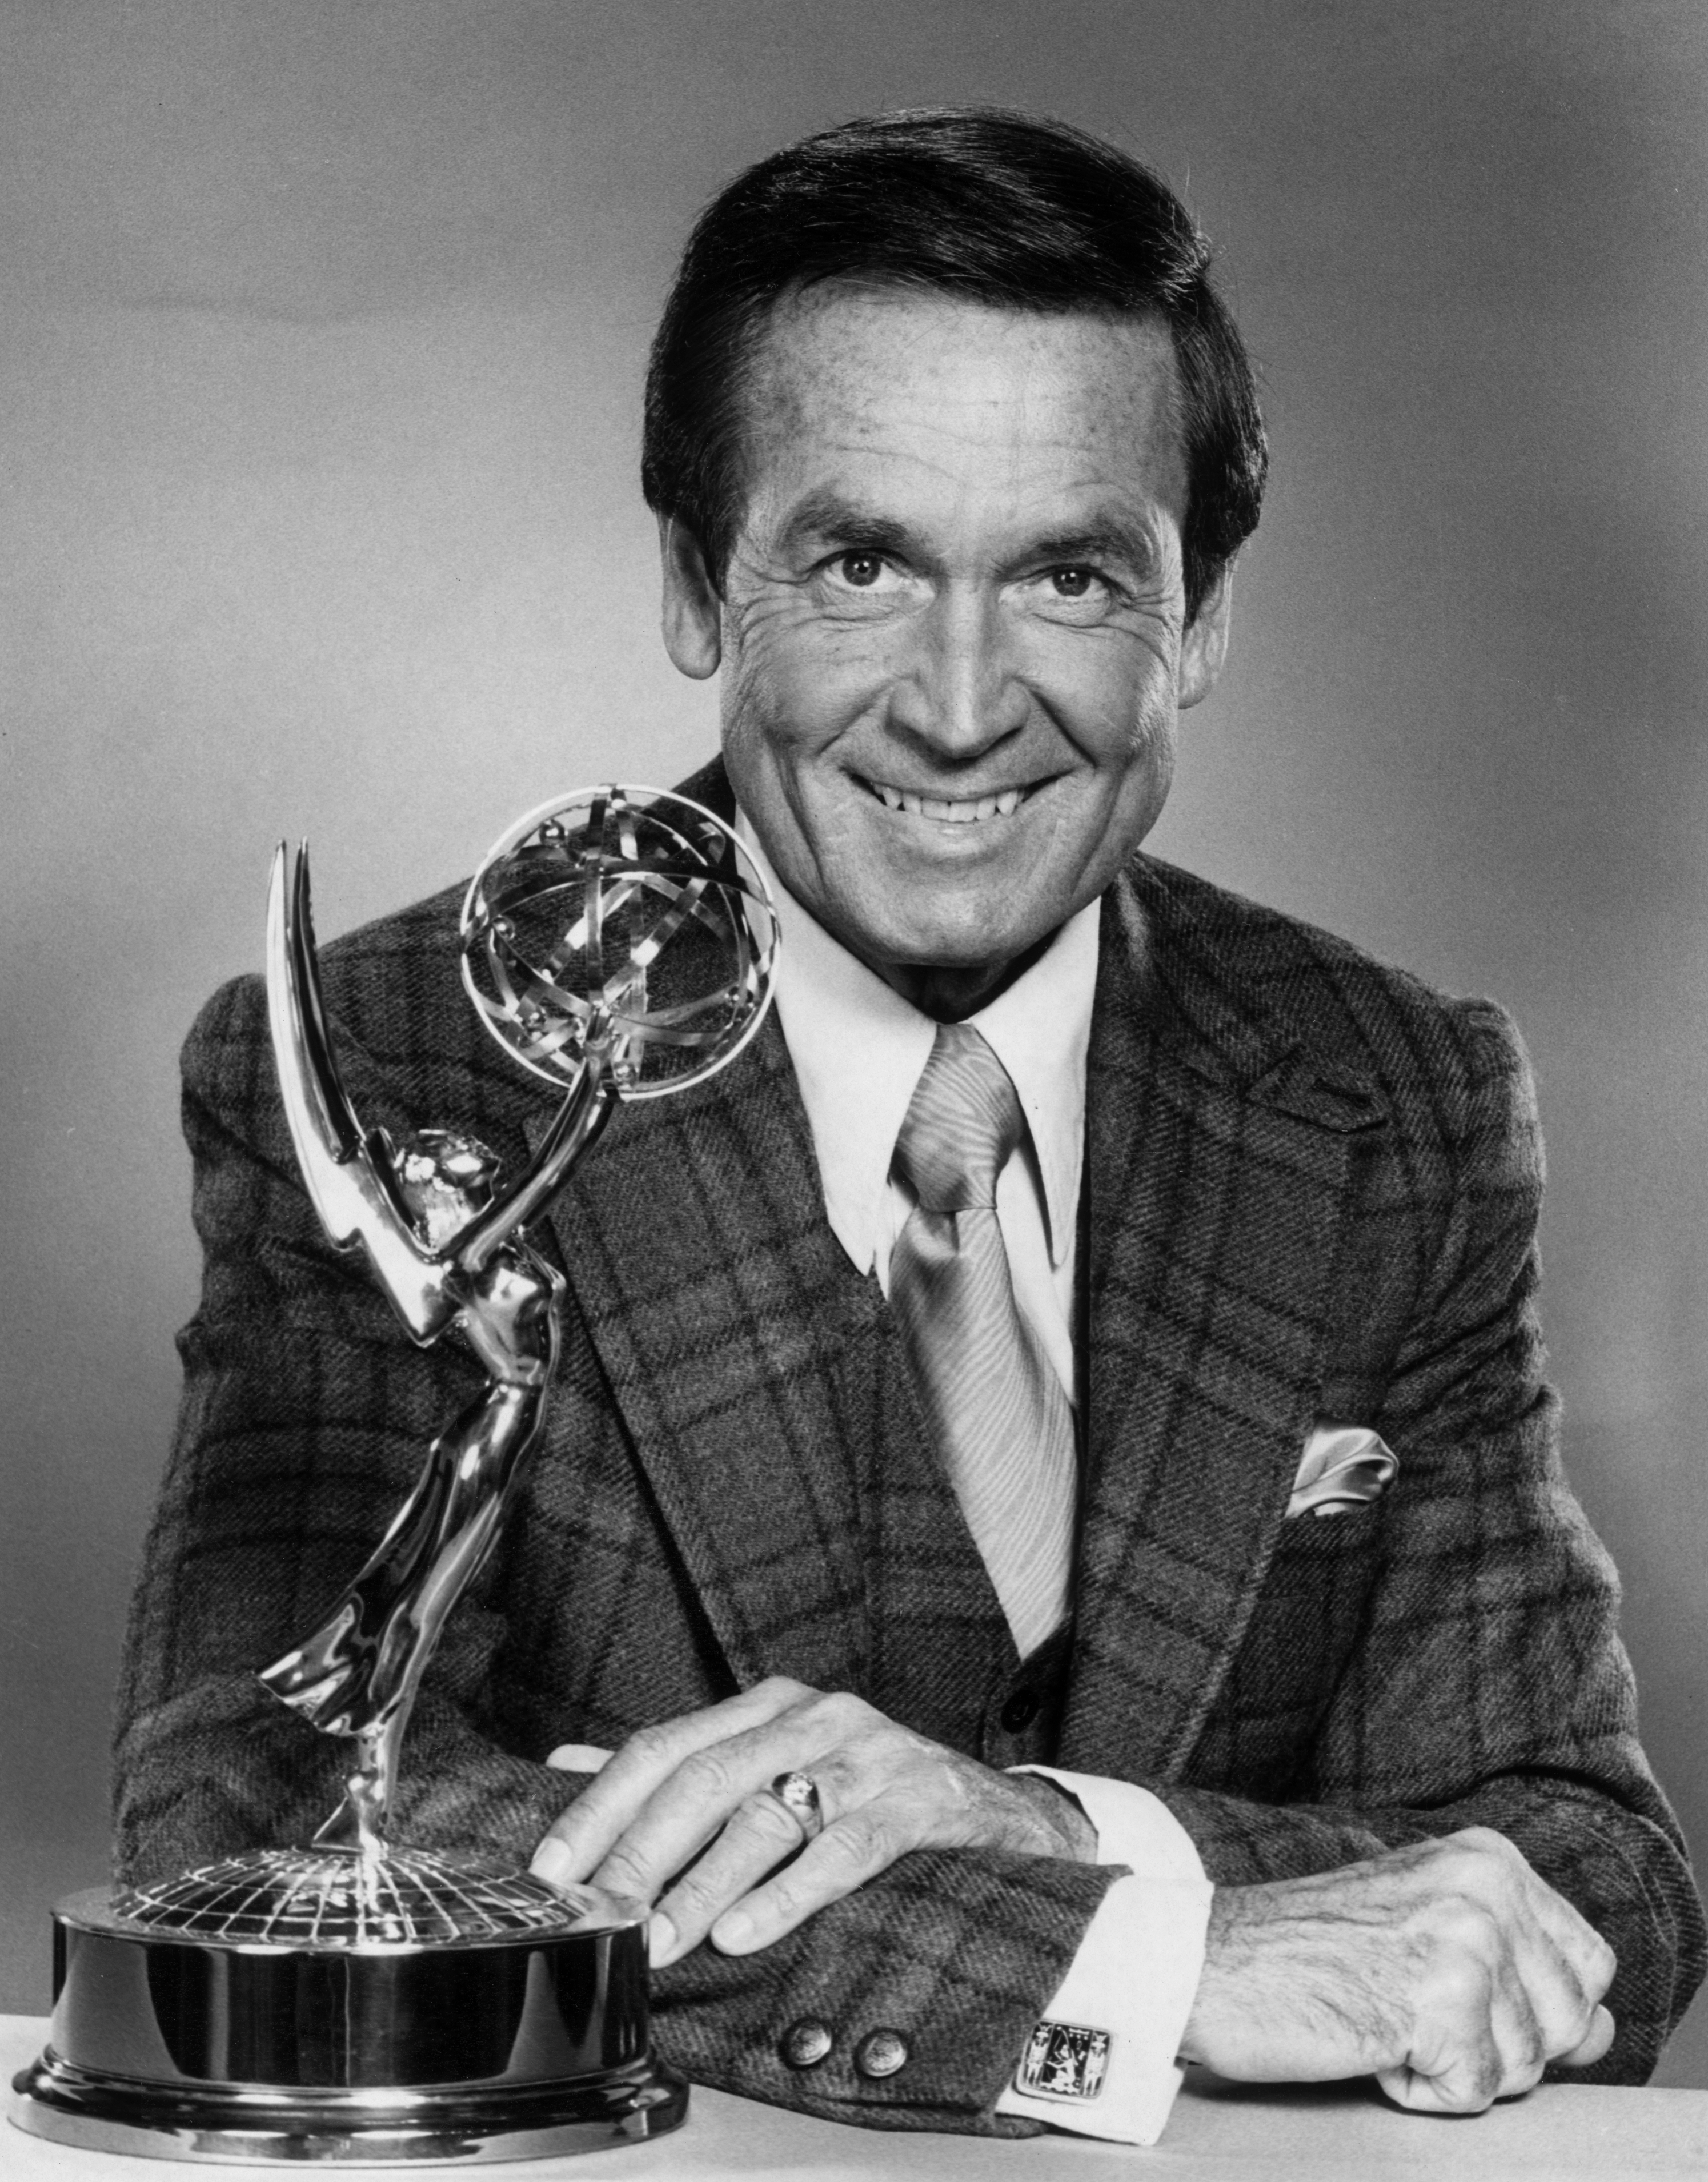 Bob Barker posing in a black and white portrait for the "Sixth Annual Daytime Emmy Awards" in 1979 | Source: Getty Images